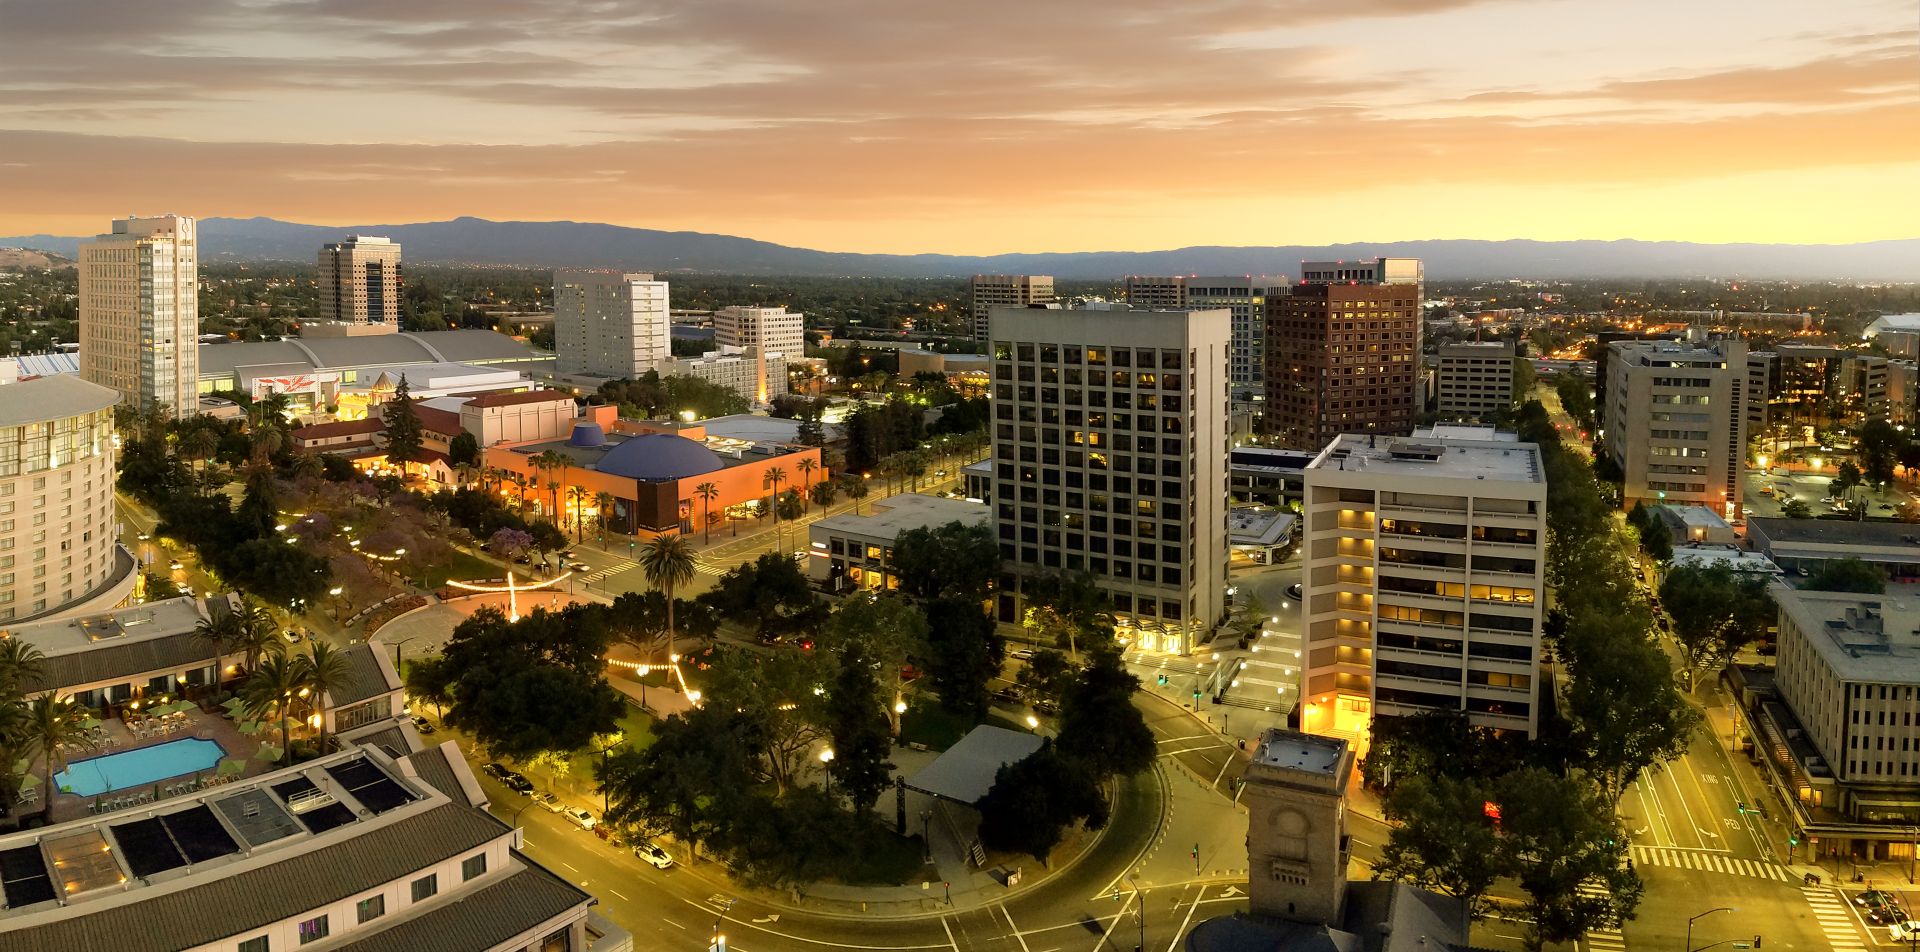 San Jose is considered the capital of Silicon Valley